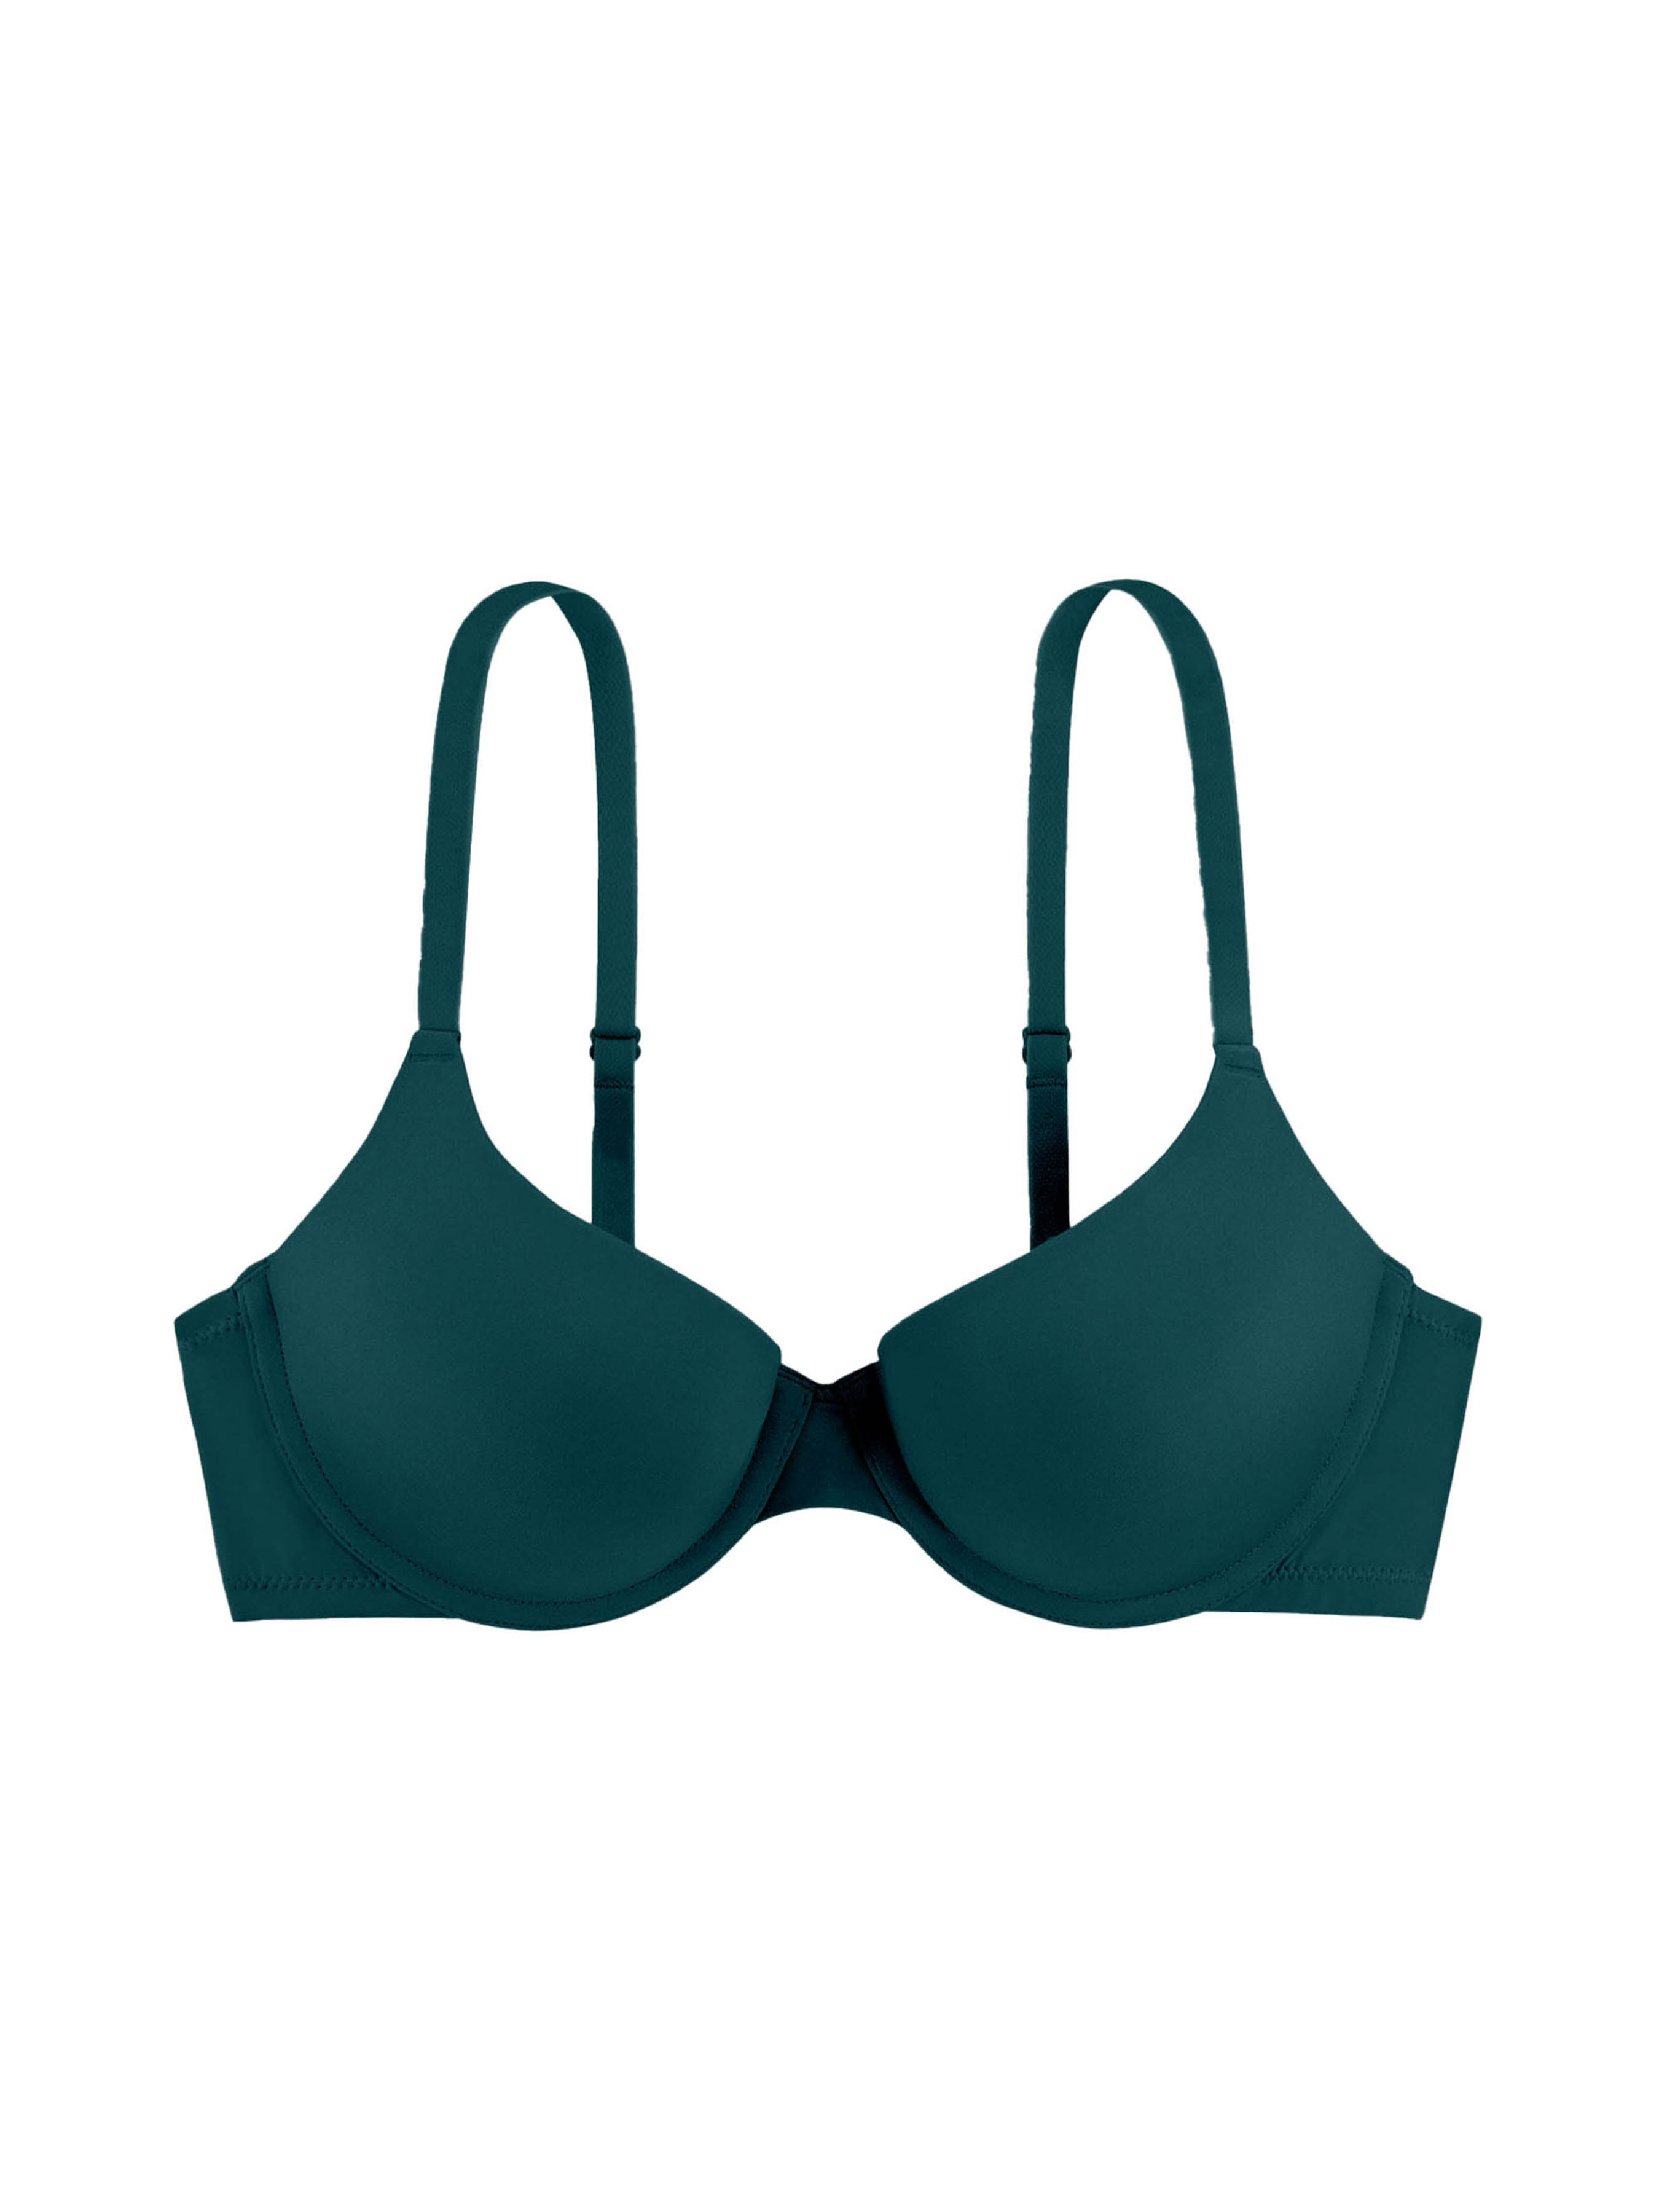 COMFELIE Wireless Bra with Support D-G Cups for Women Seamless Bra